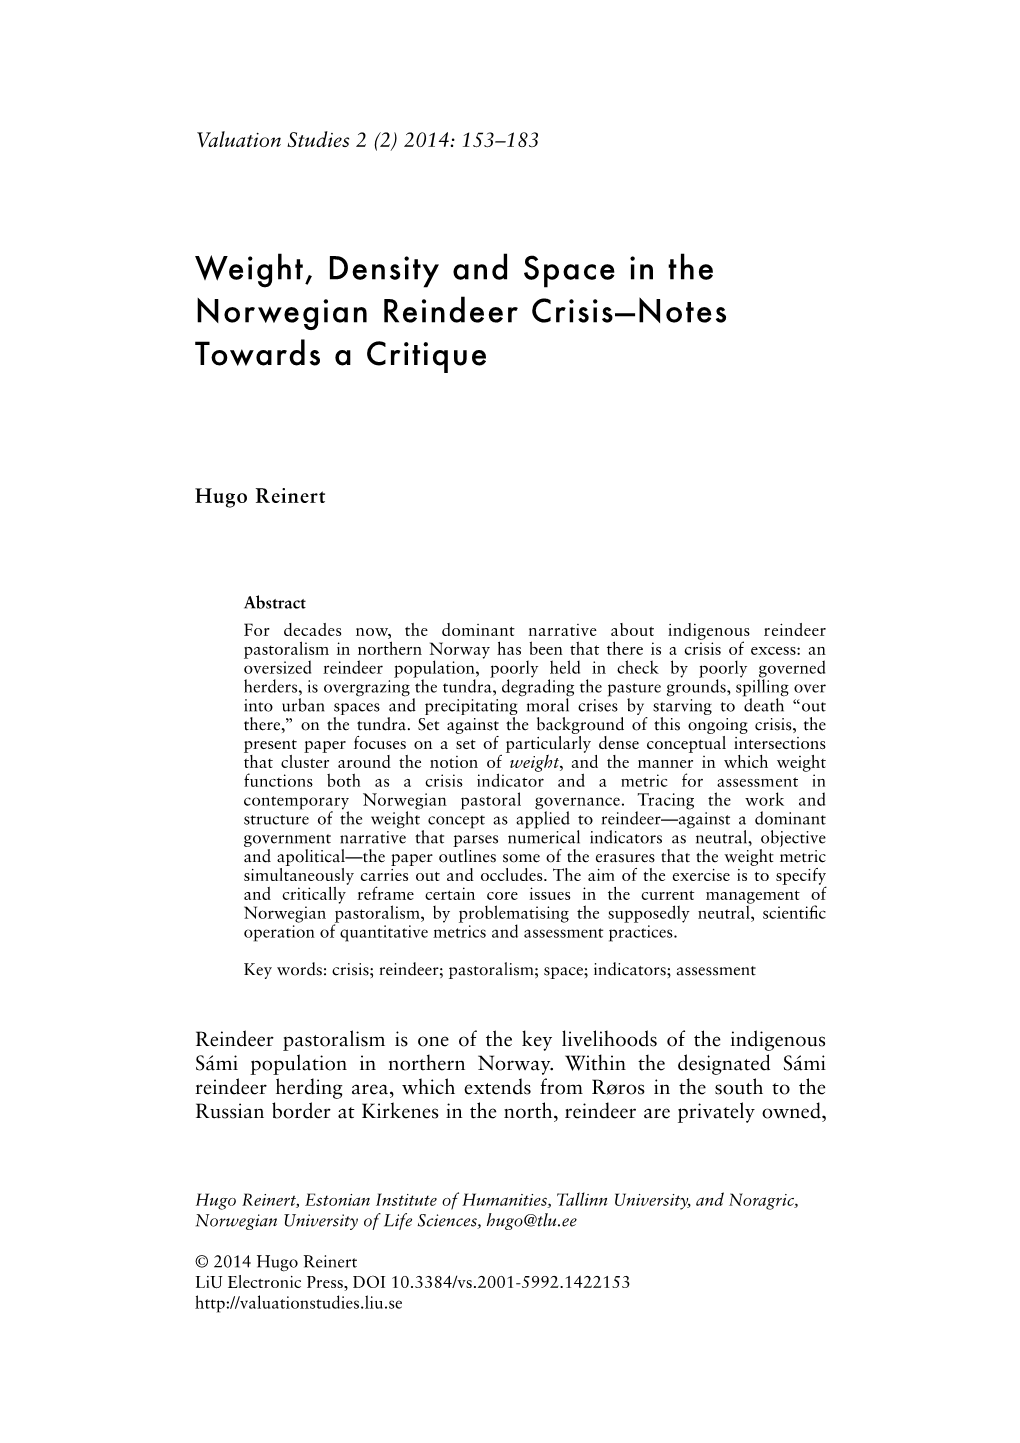 Weight Density and Space in the Norwegian